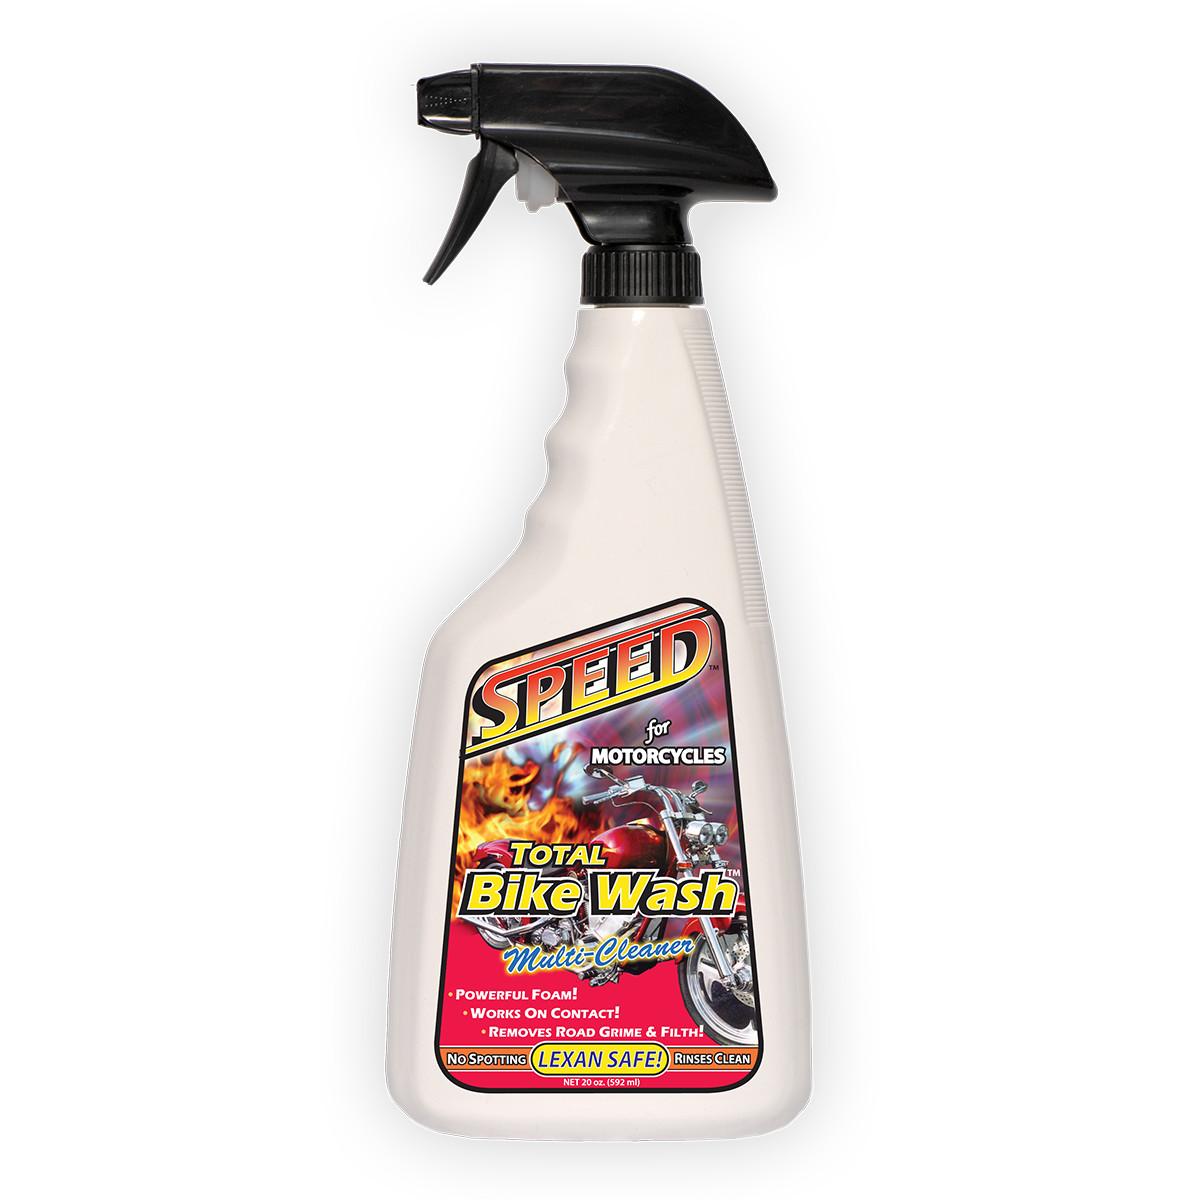 Bike Cleaning Products For ALL Bikes!